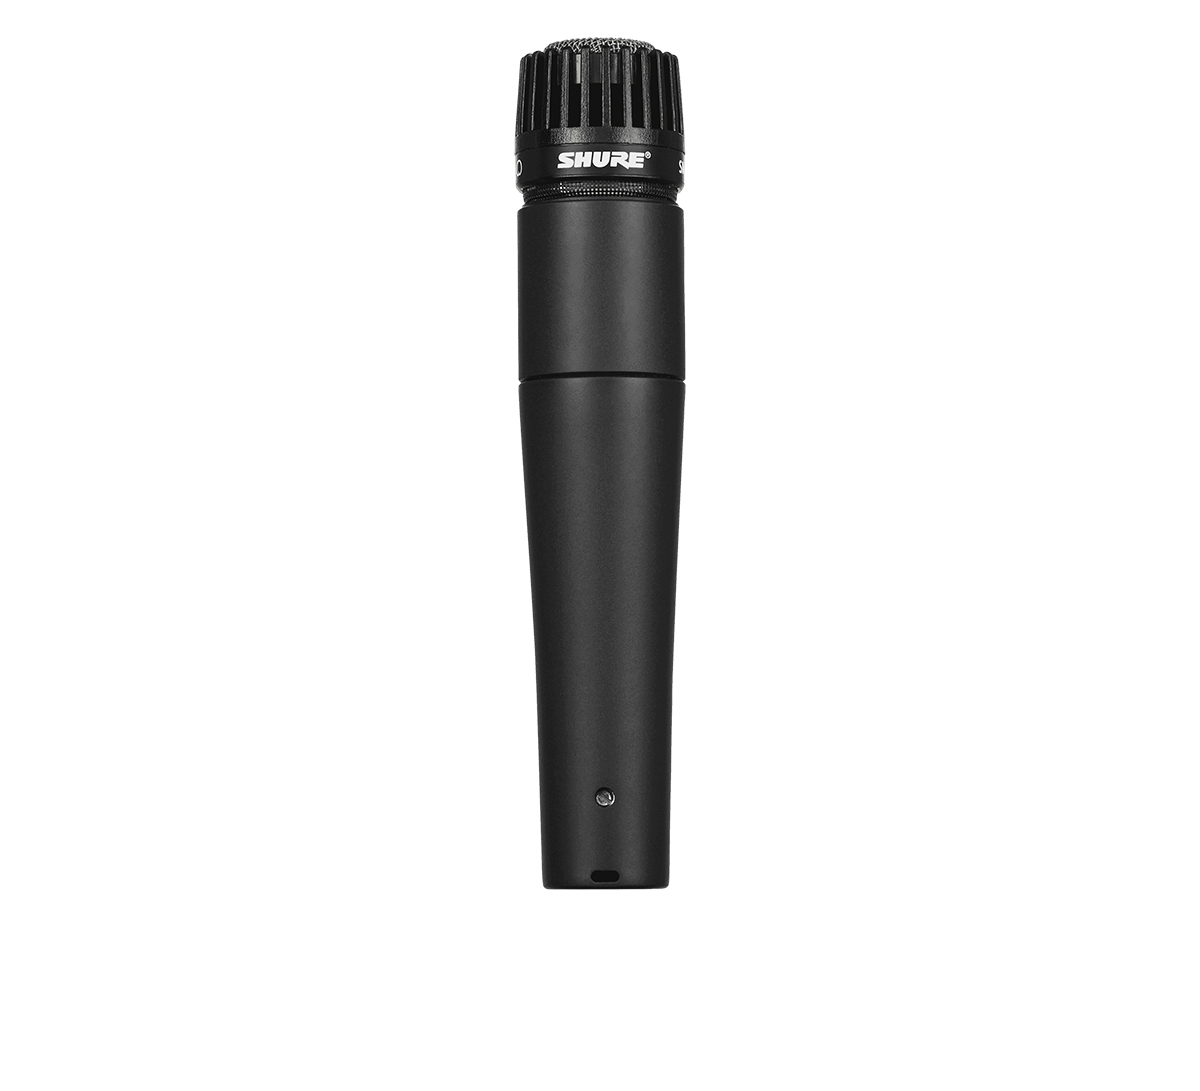 An image of Shure SM57 Dynamic Microphone